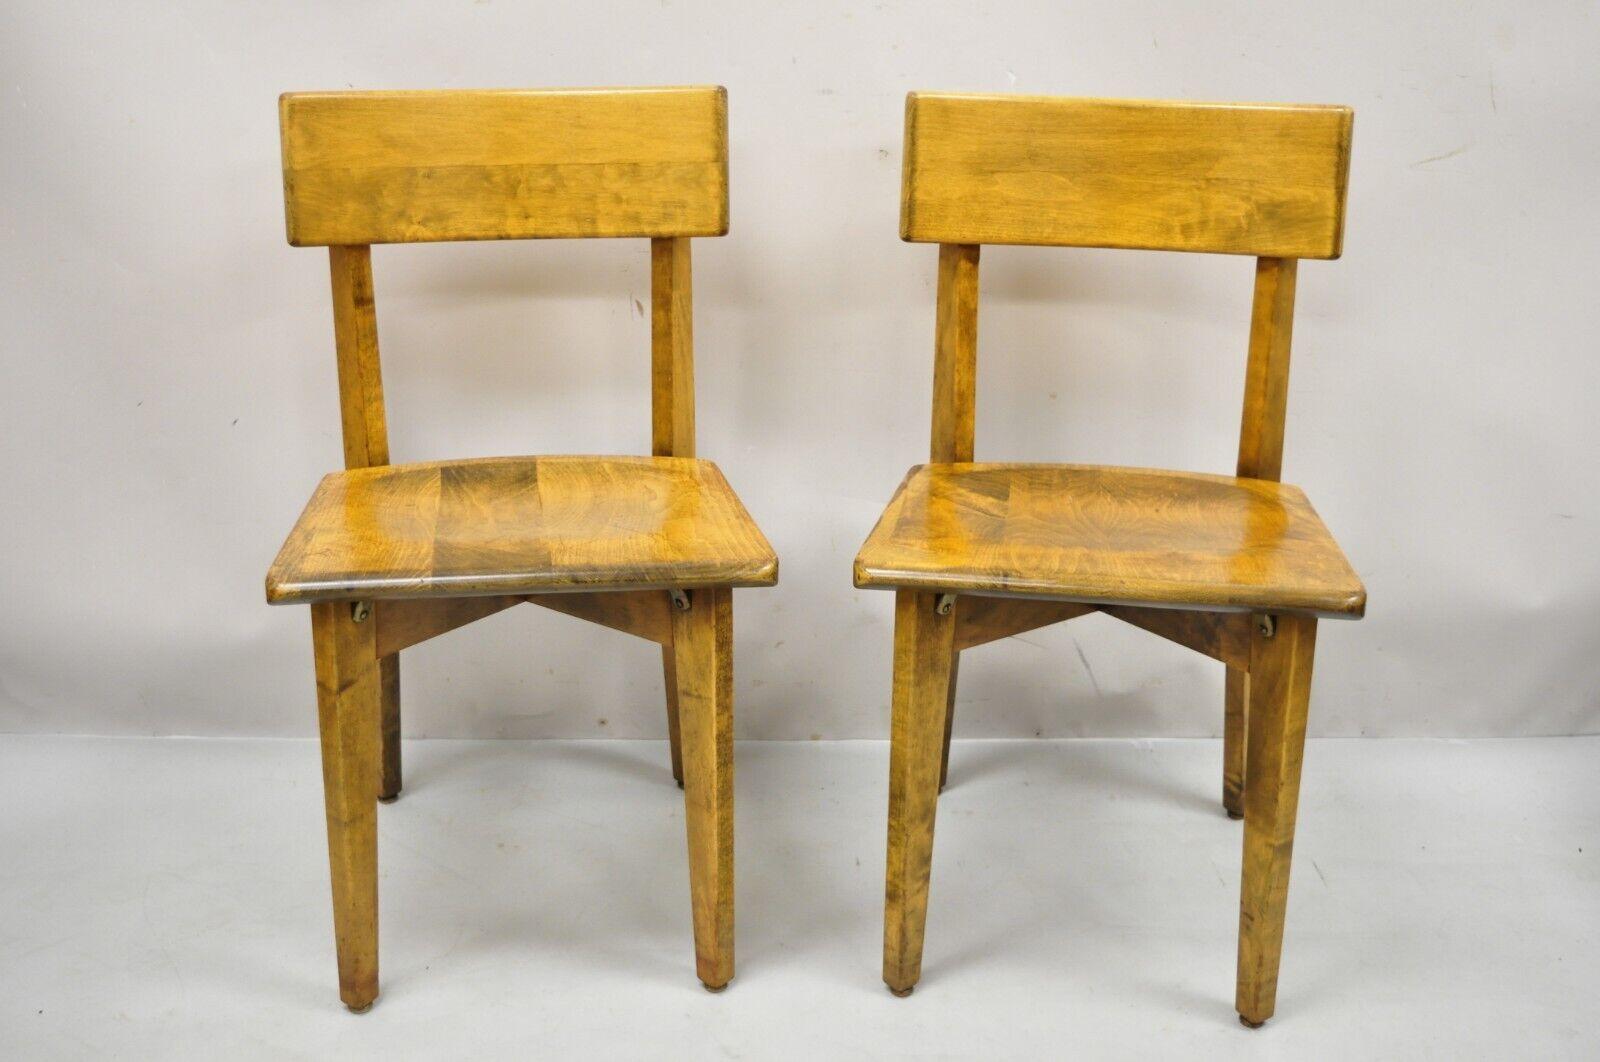 Vintage Gunlocke Mid-Century Modern Wooden side chairs - a Pair. Item features (2) side chairs, solid wood frames, beautiful wood grain, original label, very nice vintage set, quality American craftsmanship. Circa Mid 20th Century.
Measurements: